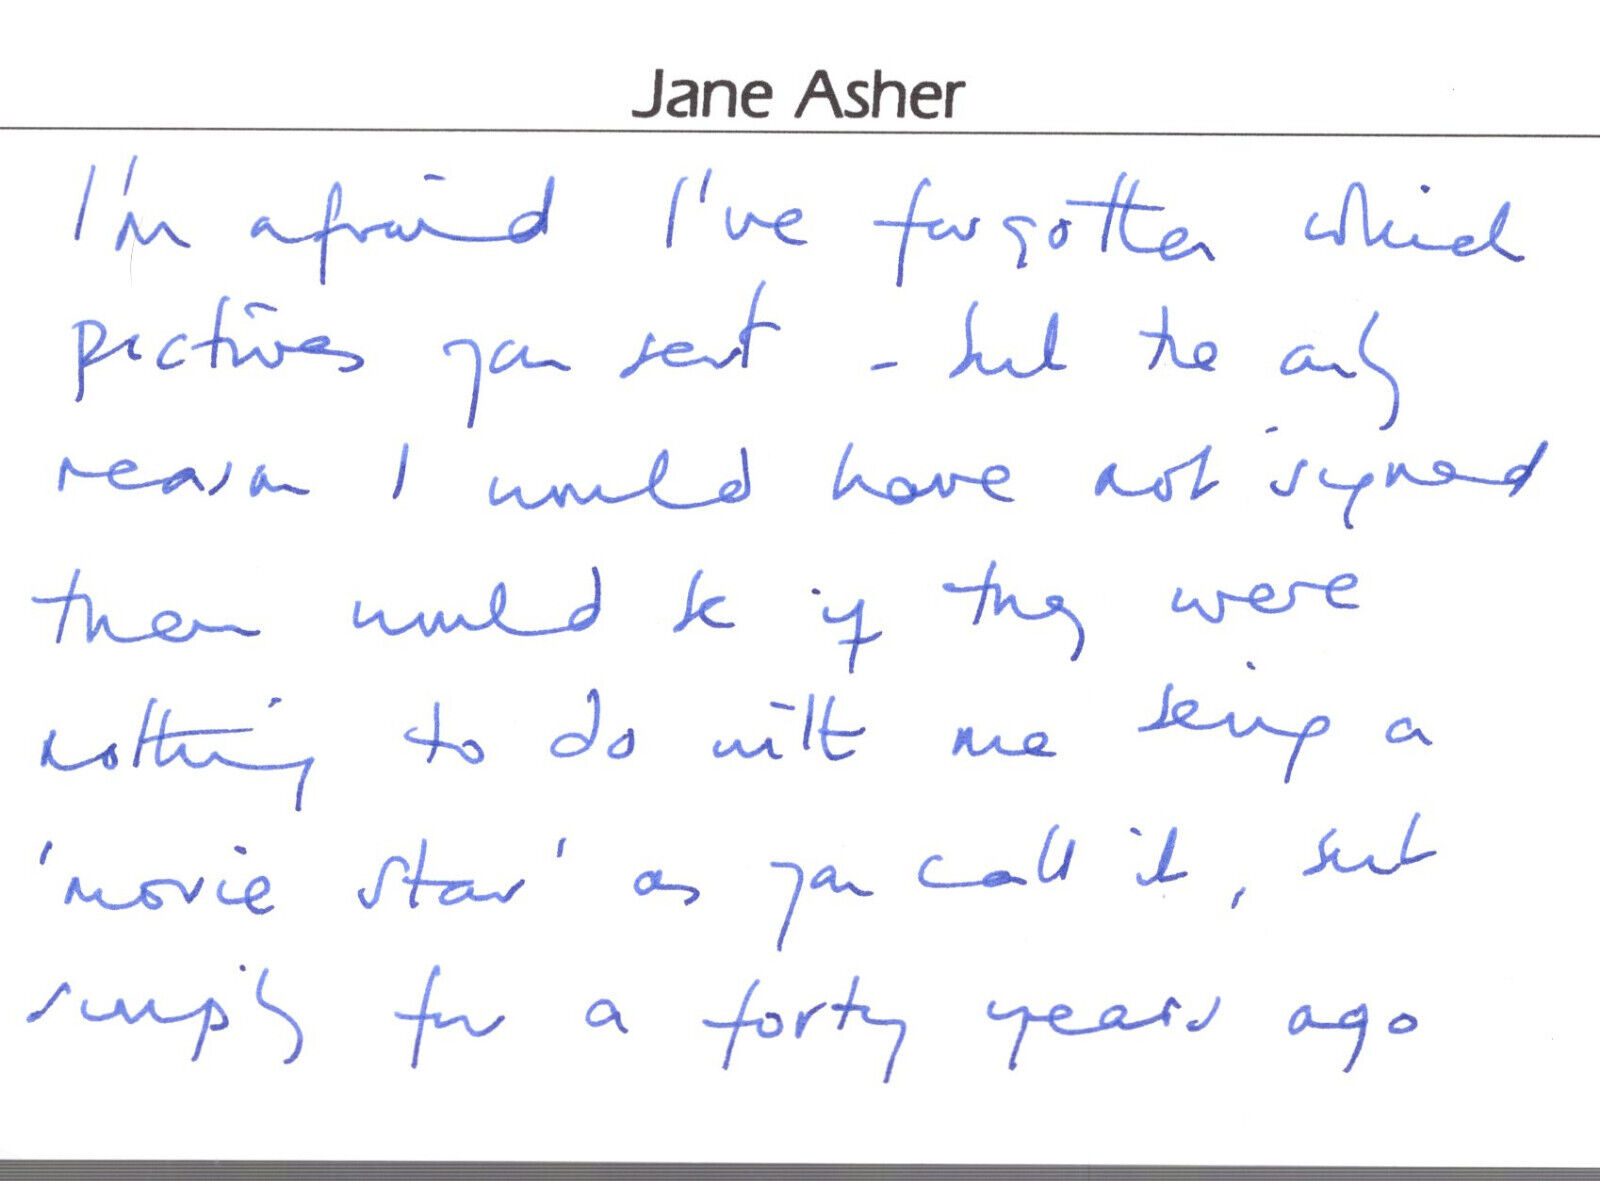 JANE ASHER HAND SIGNED+HAND WRITTEN 4x6 NOTE+COA        PERSONAL NOTECARD